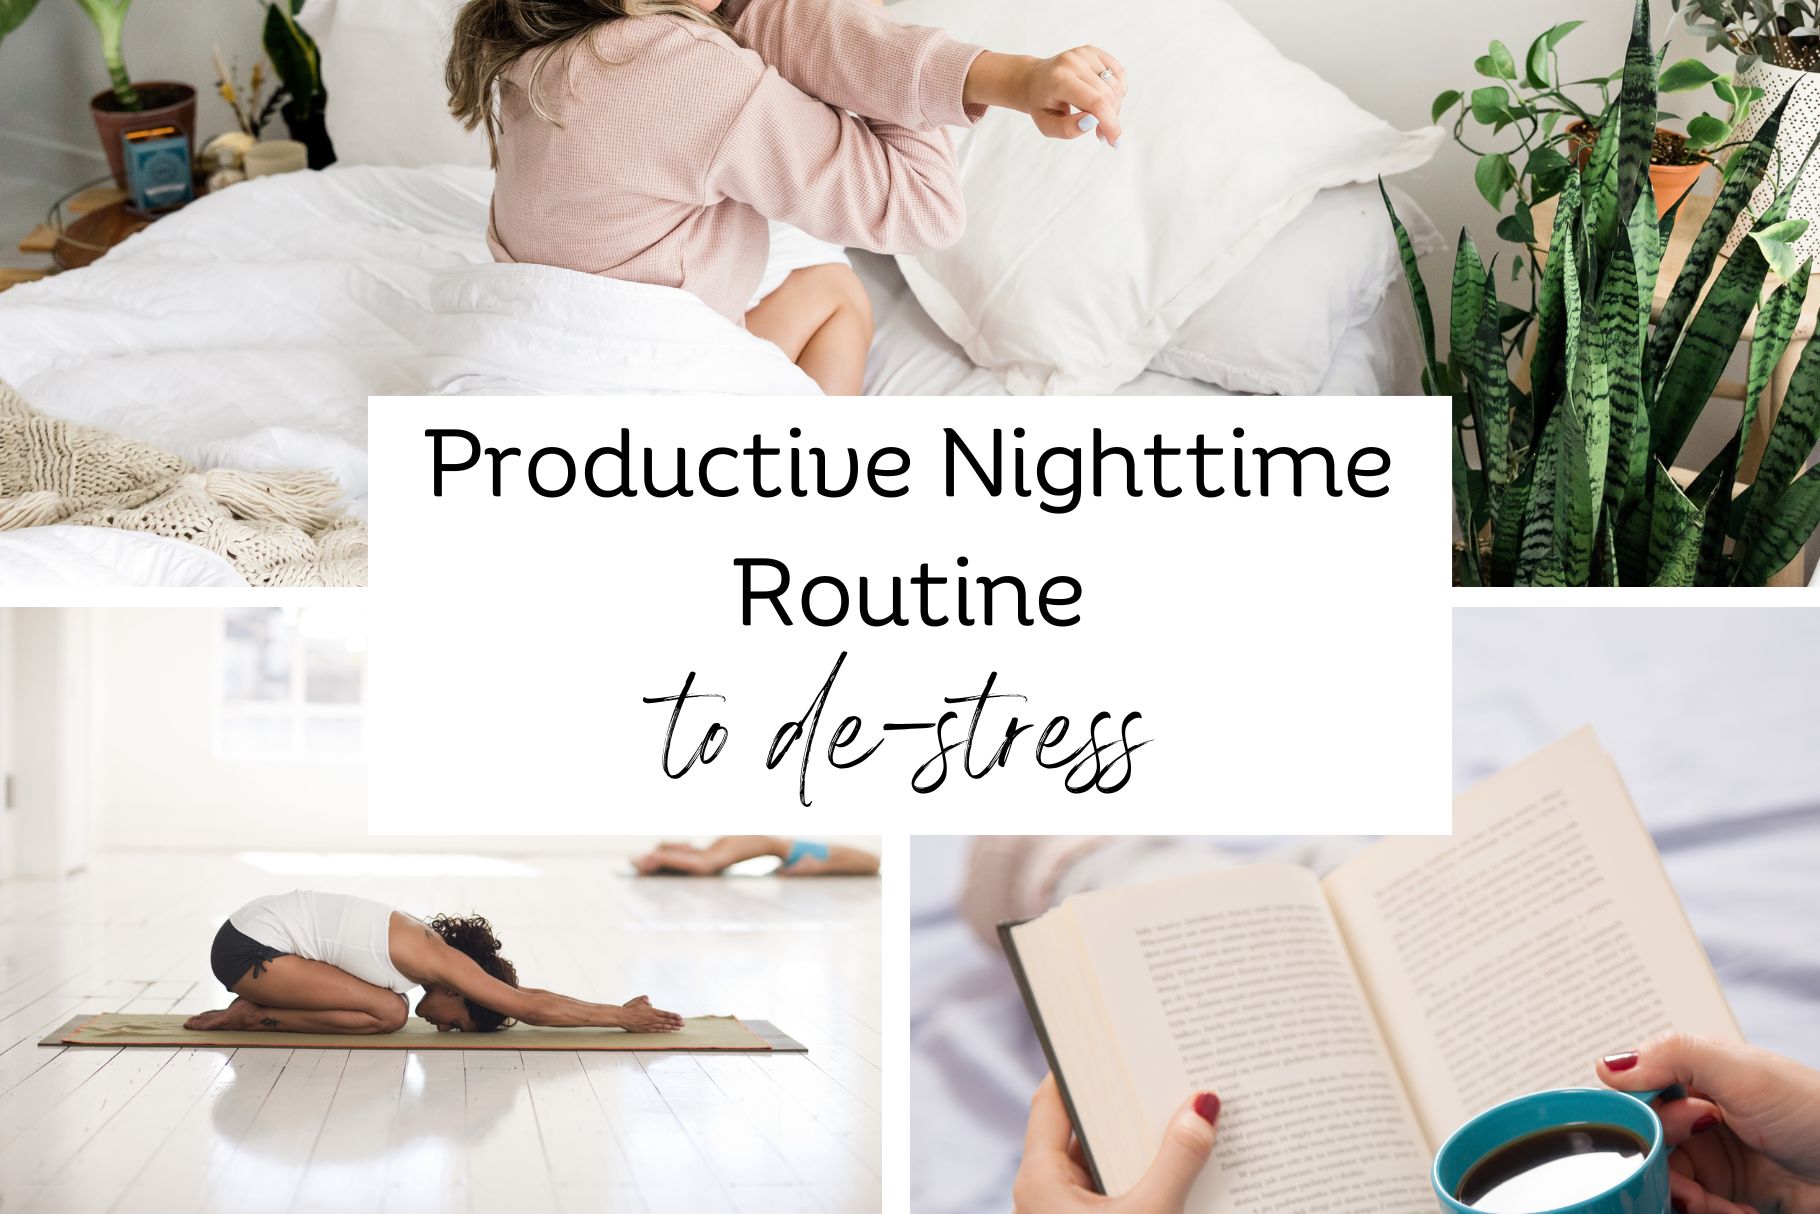 productive nighttime routine to destress.